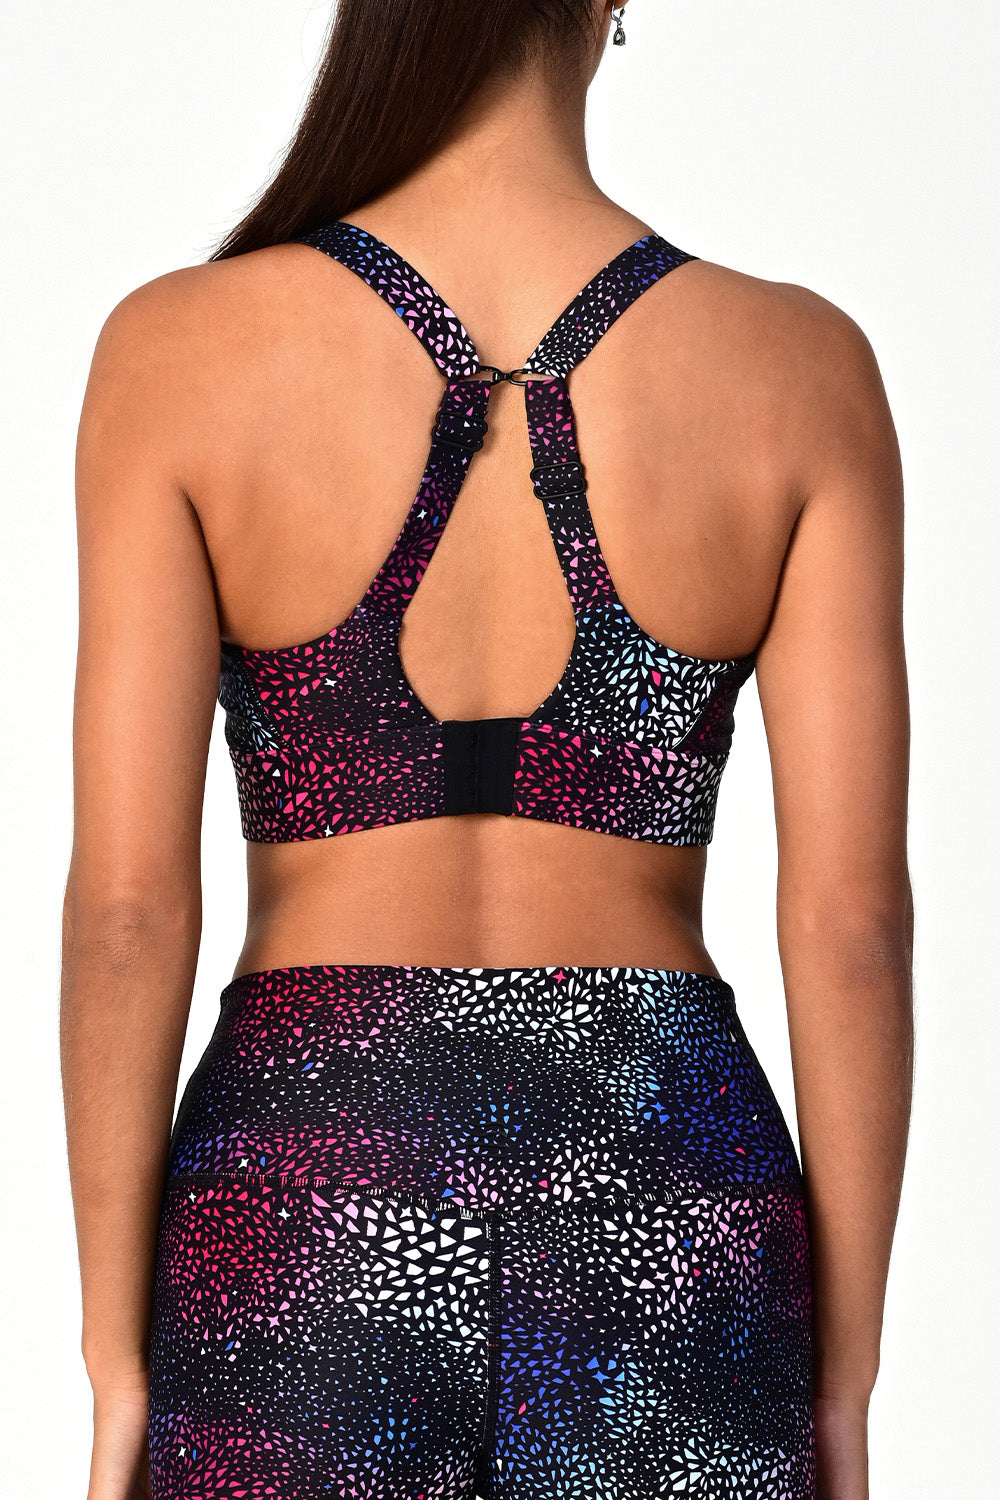 Back view of a woman wearing the Soho galaxy active bra top with shoulder straps fastened..